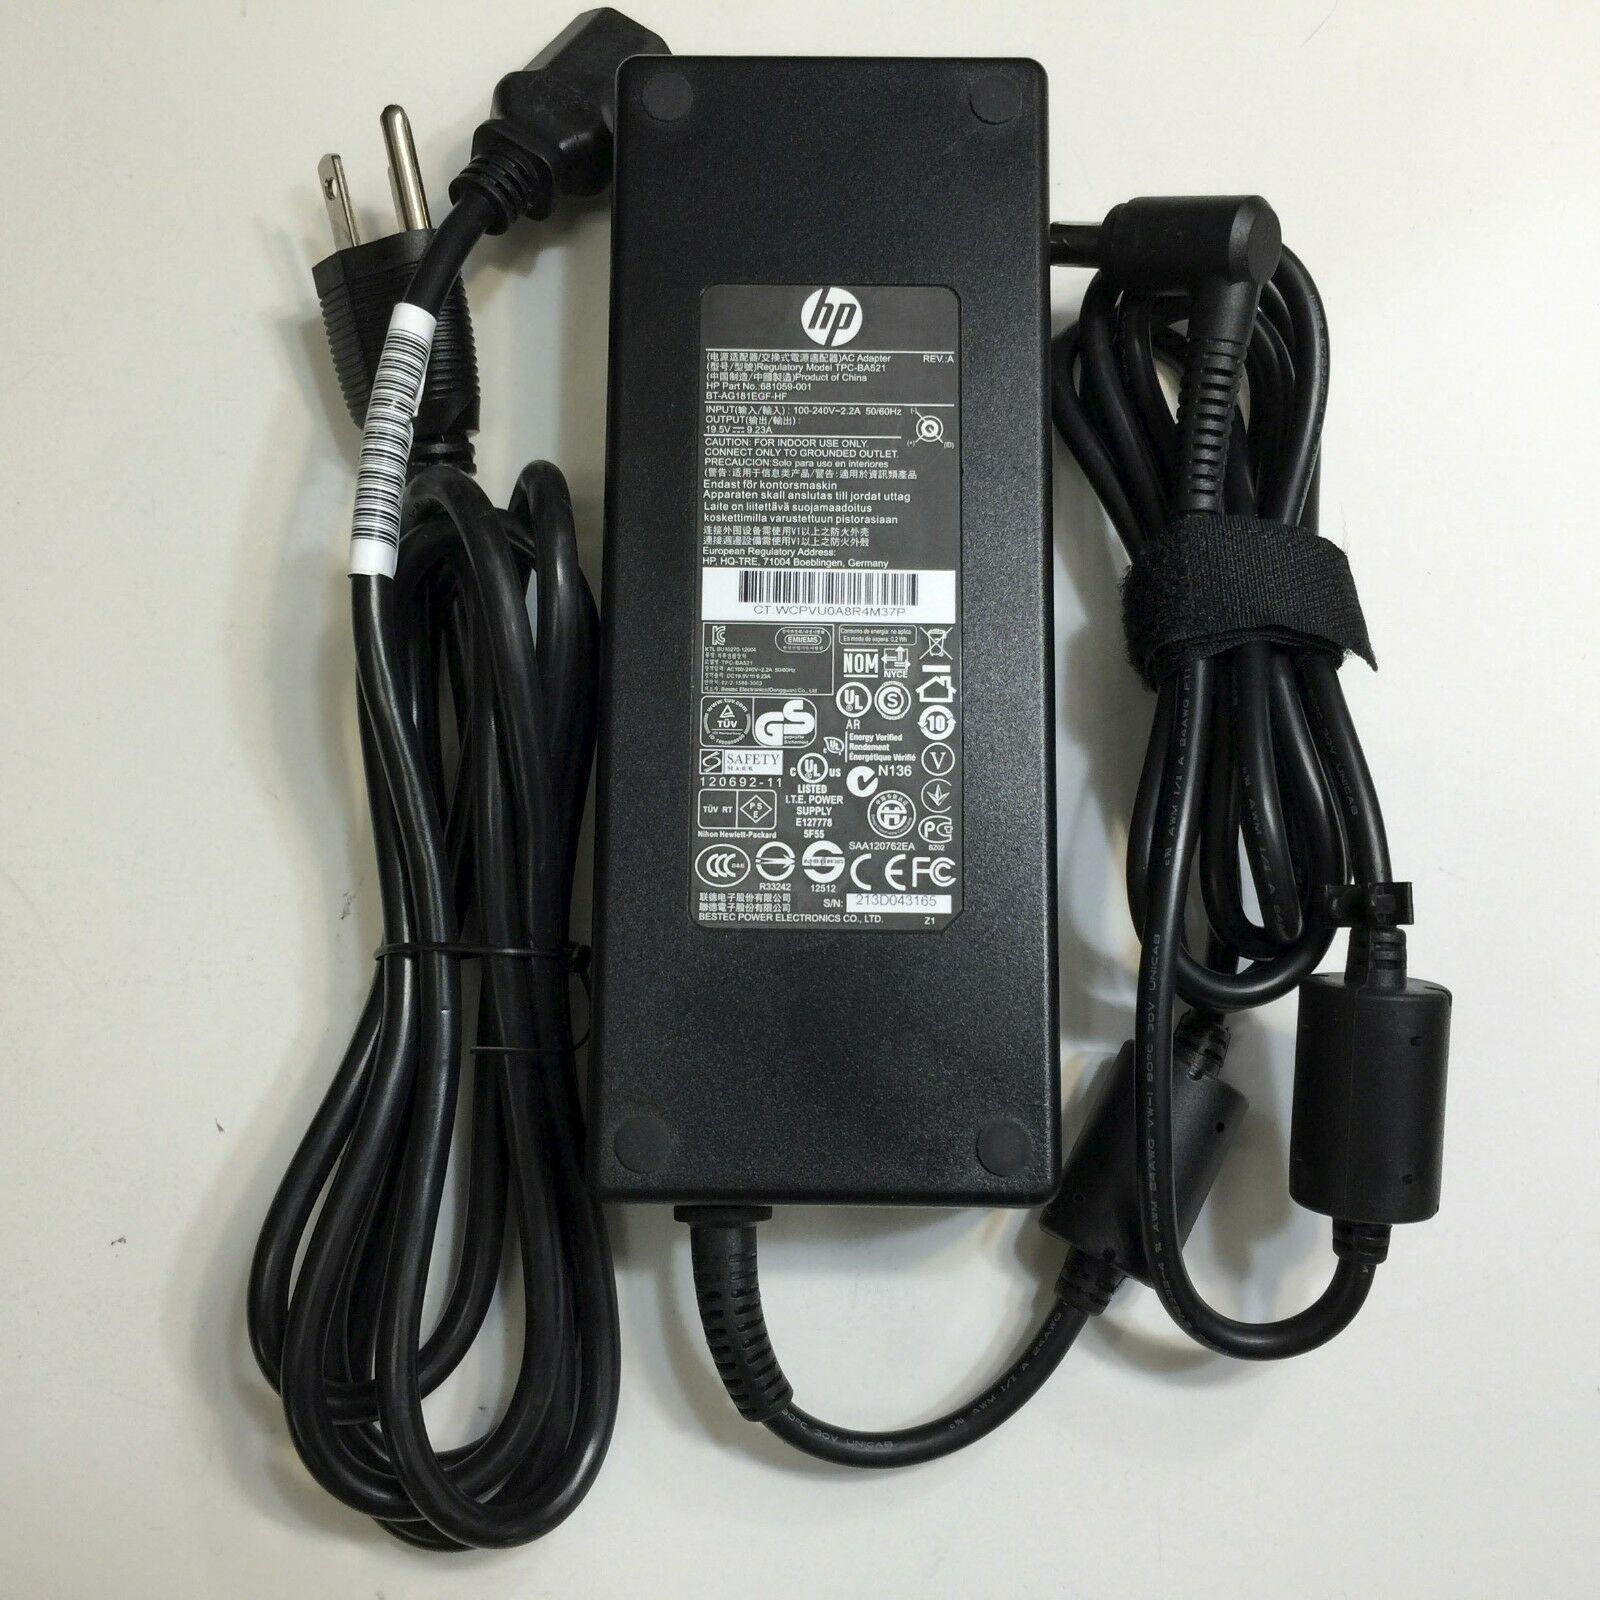 New HP ENVY CURVE 34-A051 34-A150 180W 19.5V 9.2A 681059-001 Charger AC Power Supply Adapter